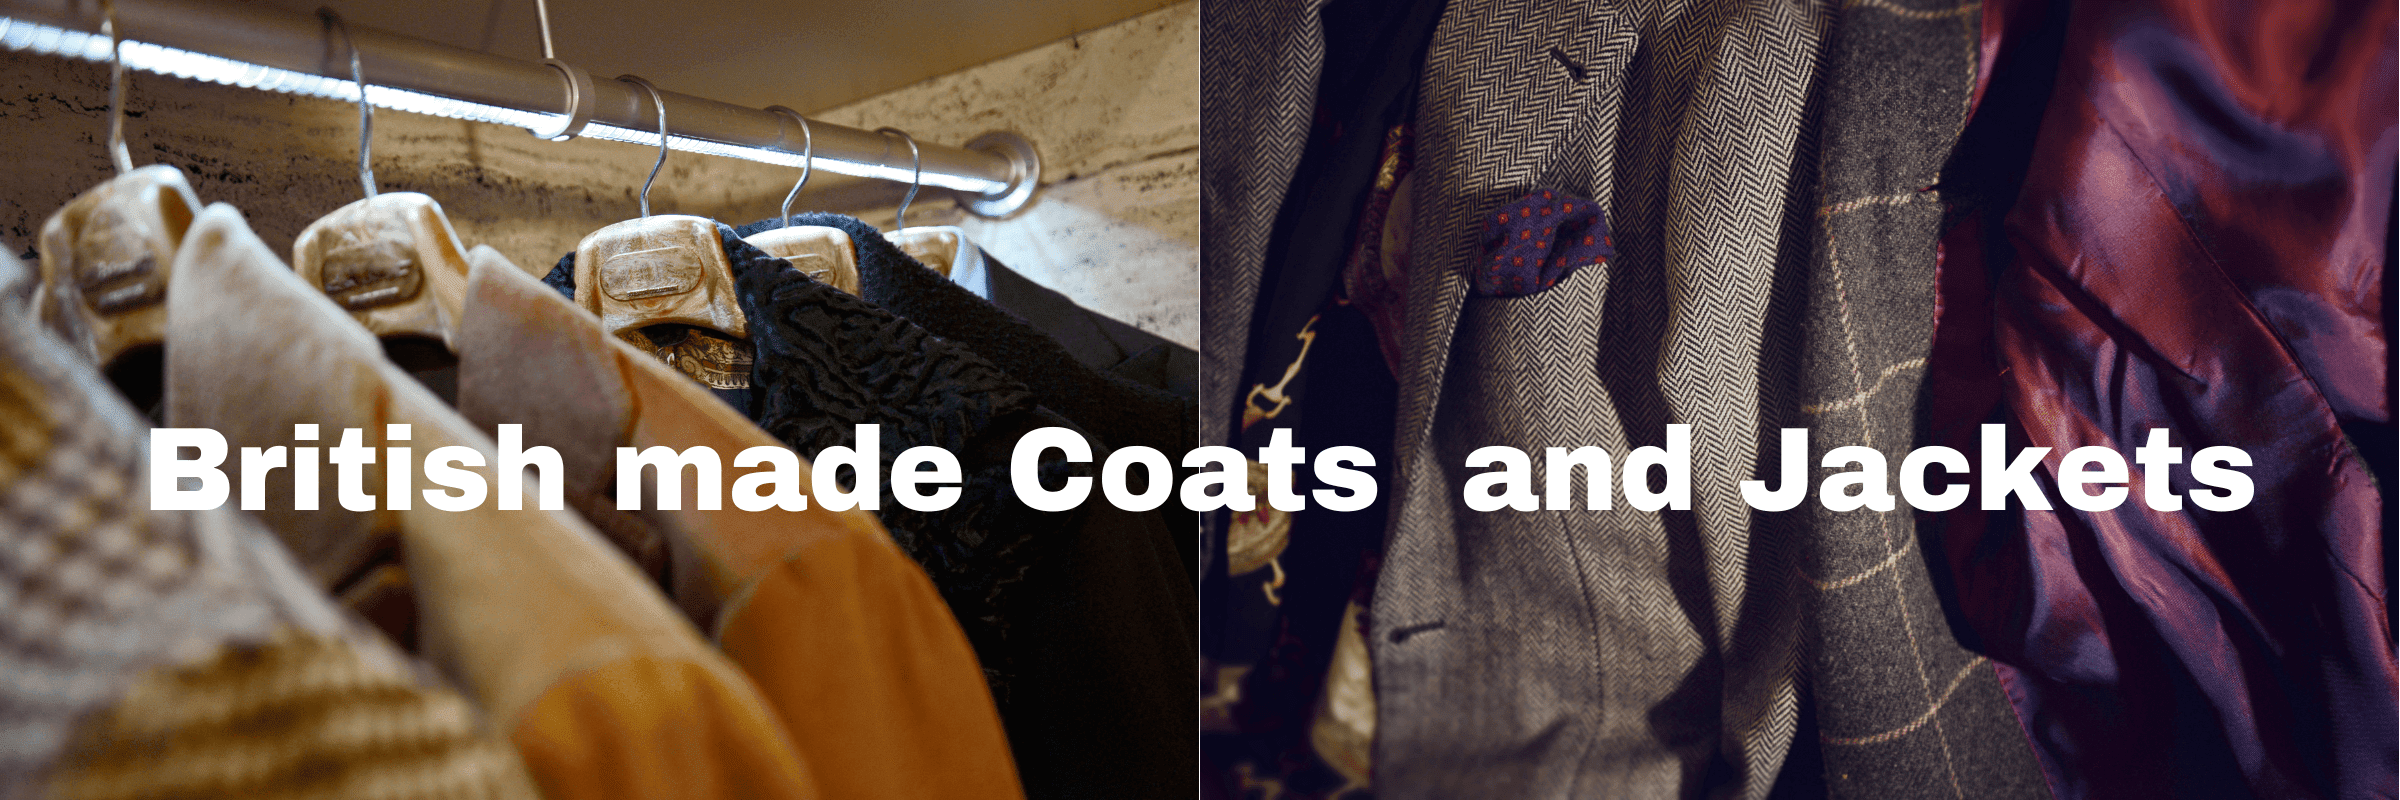 best british made coats and jackets brands